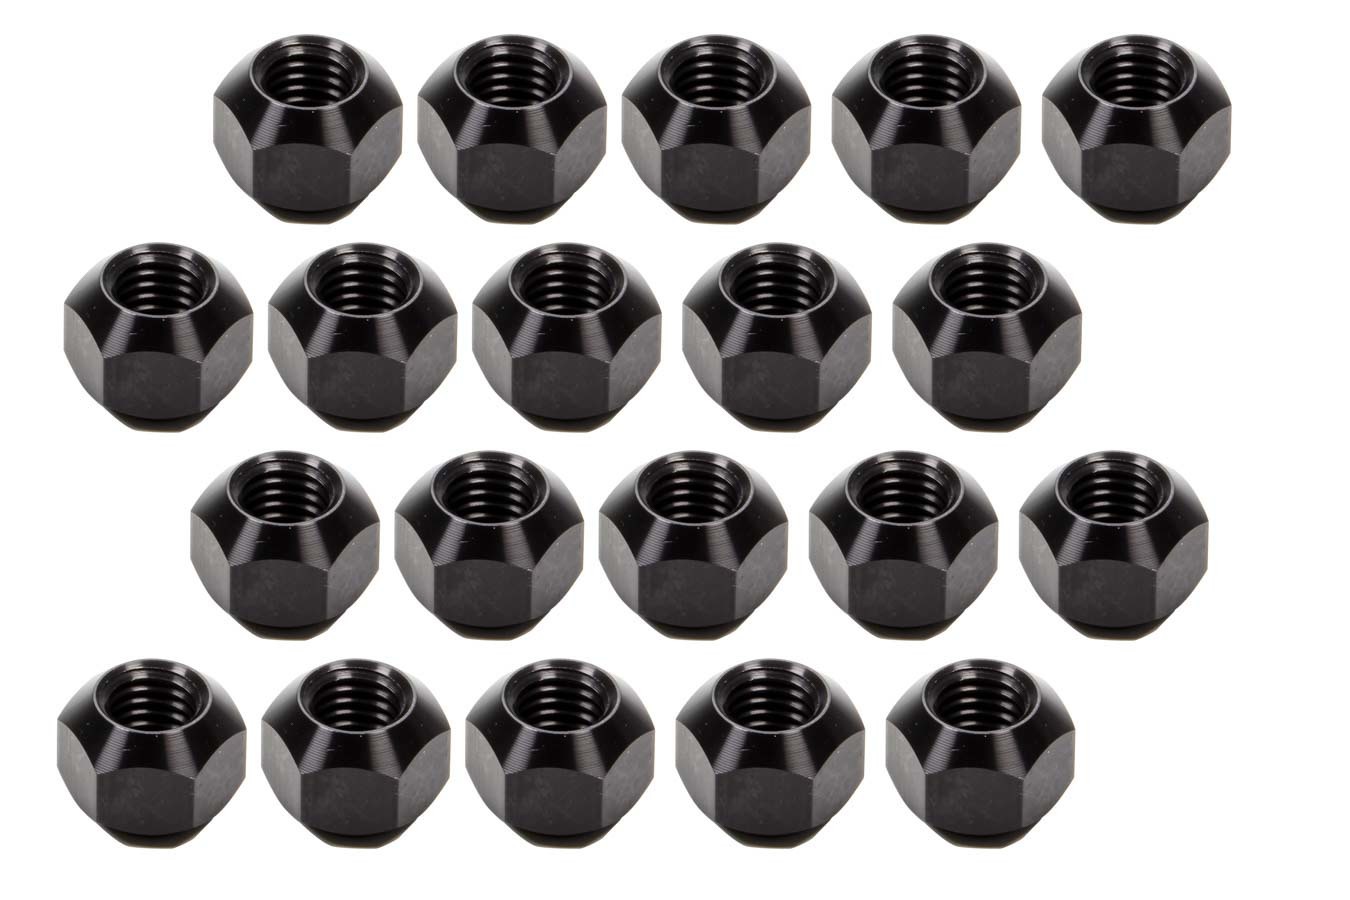 Klushman Racing Components 8201 Lug Nut, 5/8-11 in Right Hand Thread, 1 in Hex Head, Double 45 Degree Seat, Open End, Aluminum, Black Anodized, Set of 20